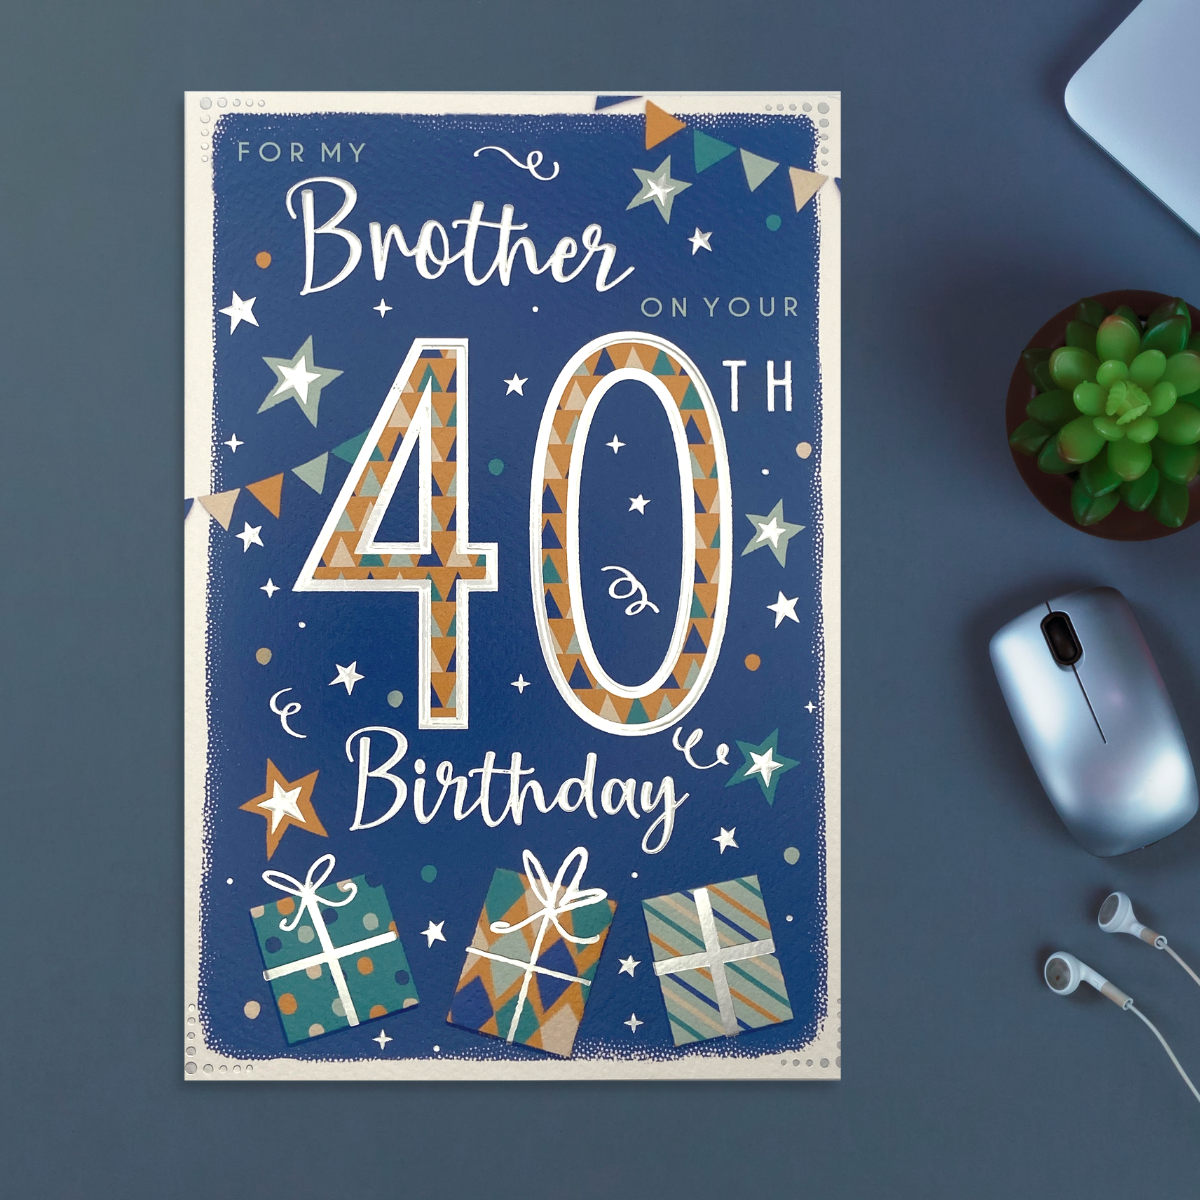 Brother 40th Birthday Card - Bunting & Gifts